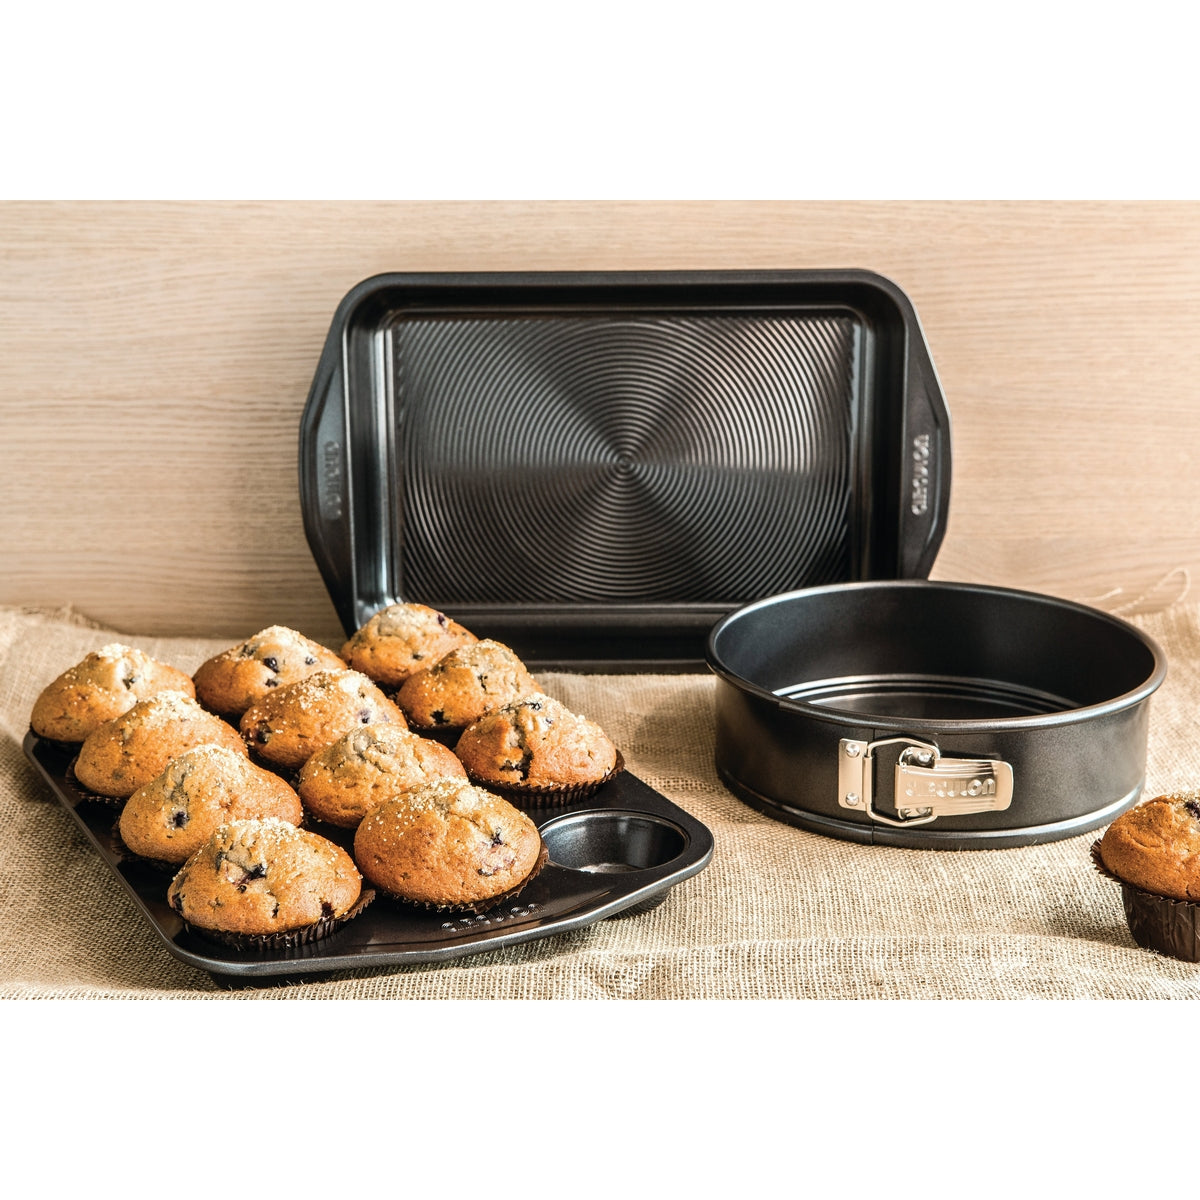 The range of bakeware from Ultimum.